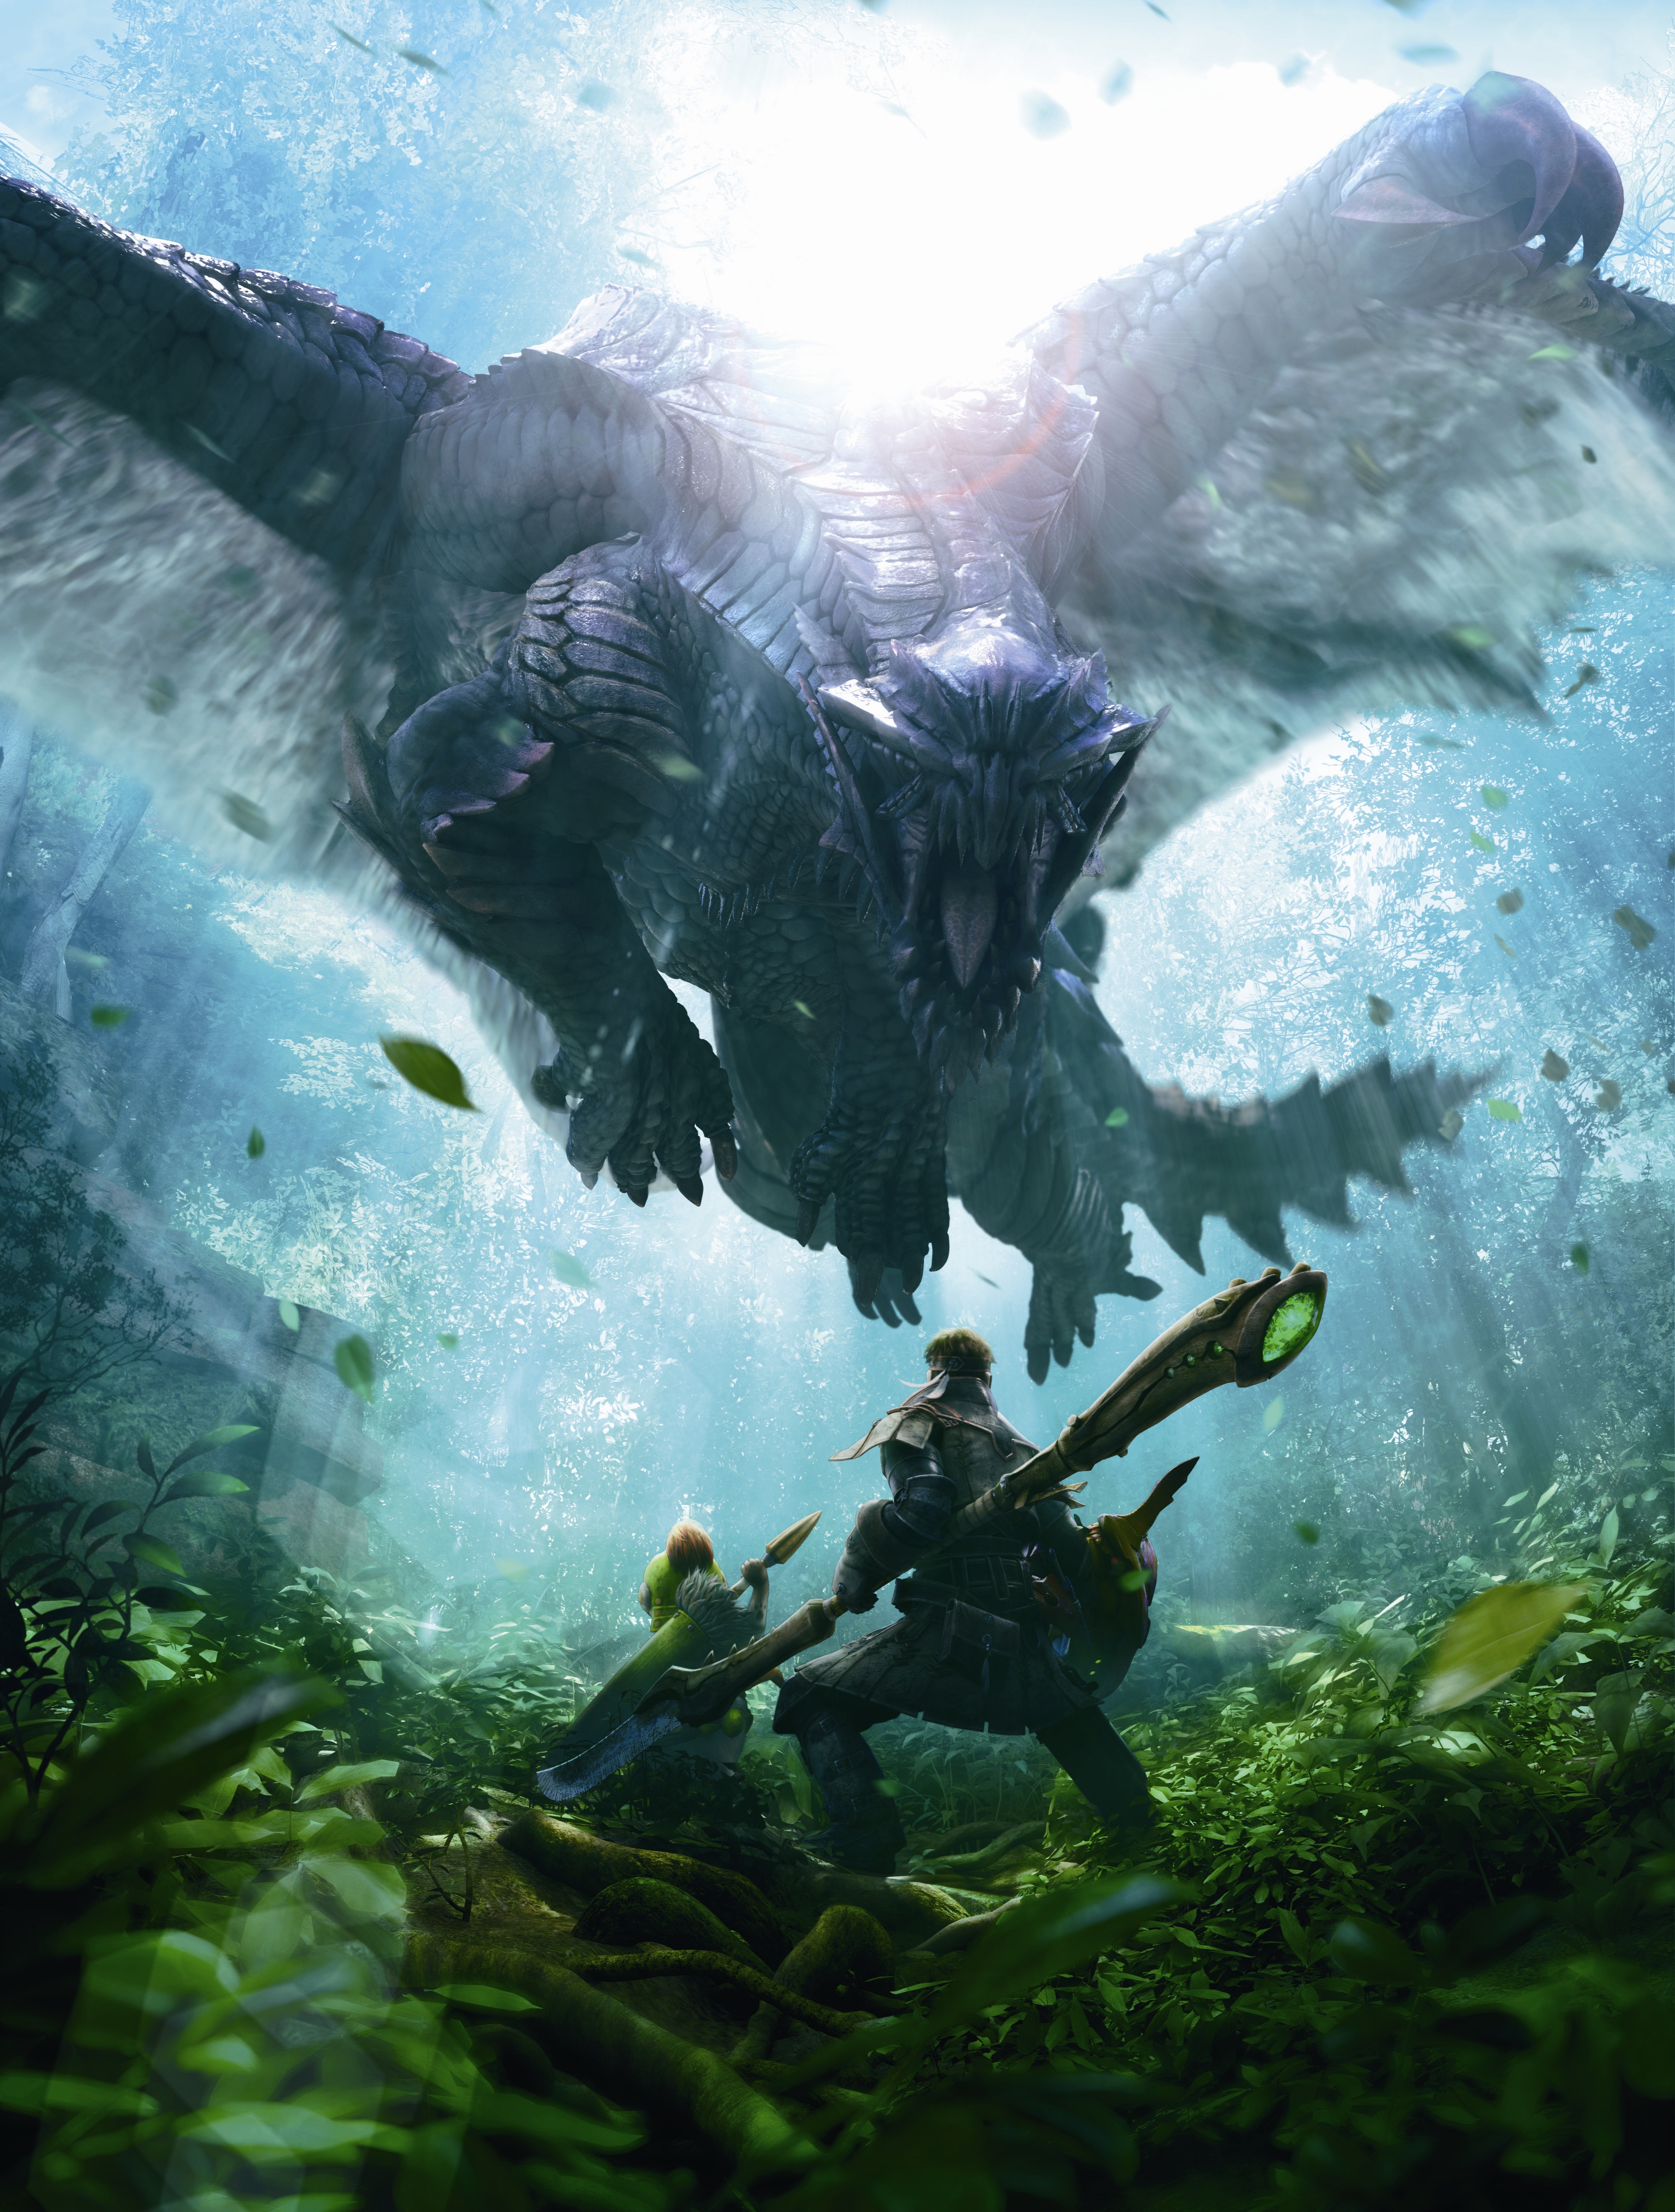 The First English Trailer for Monster Hunter 4 Ultimate has Arrived